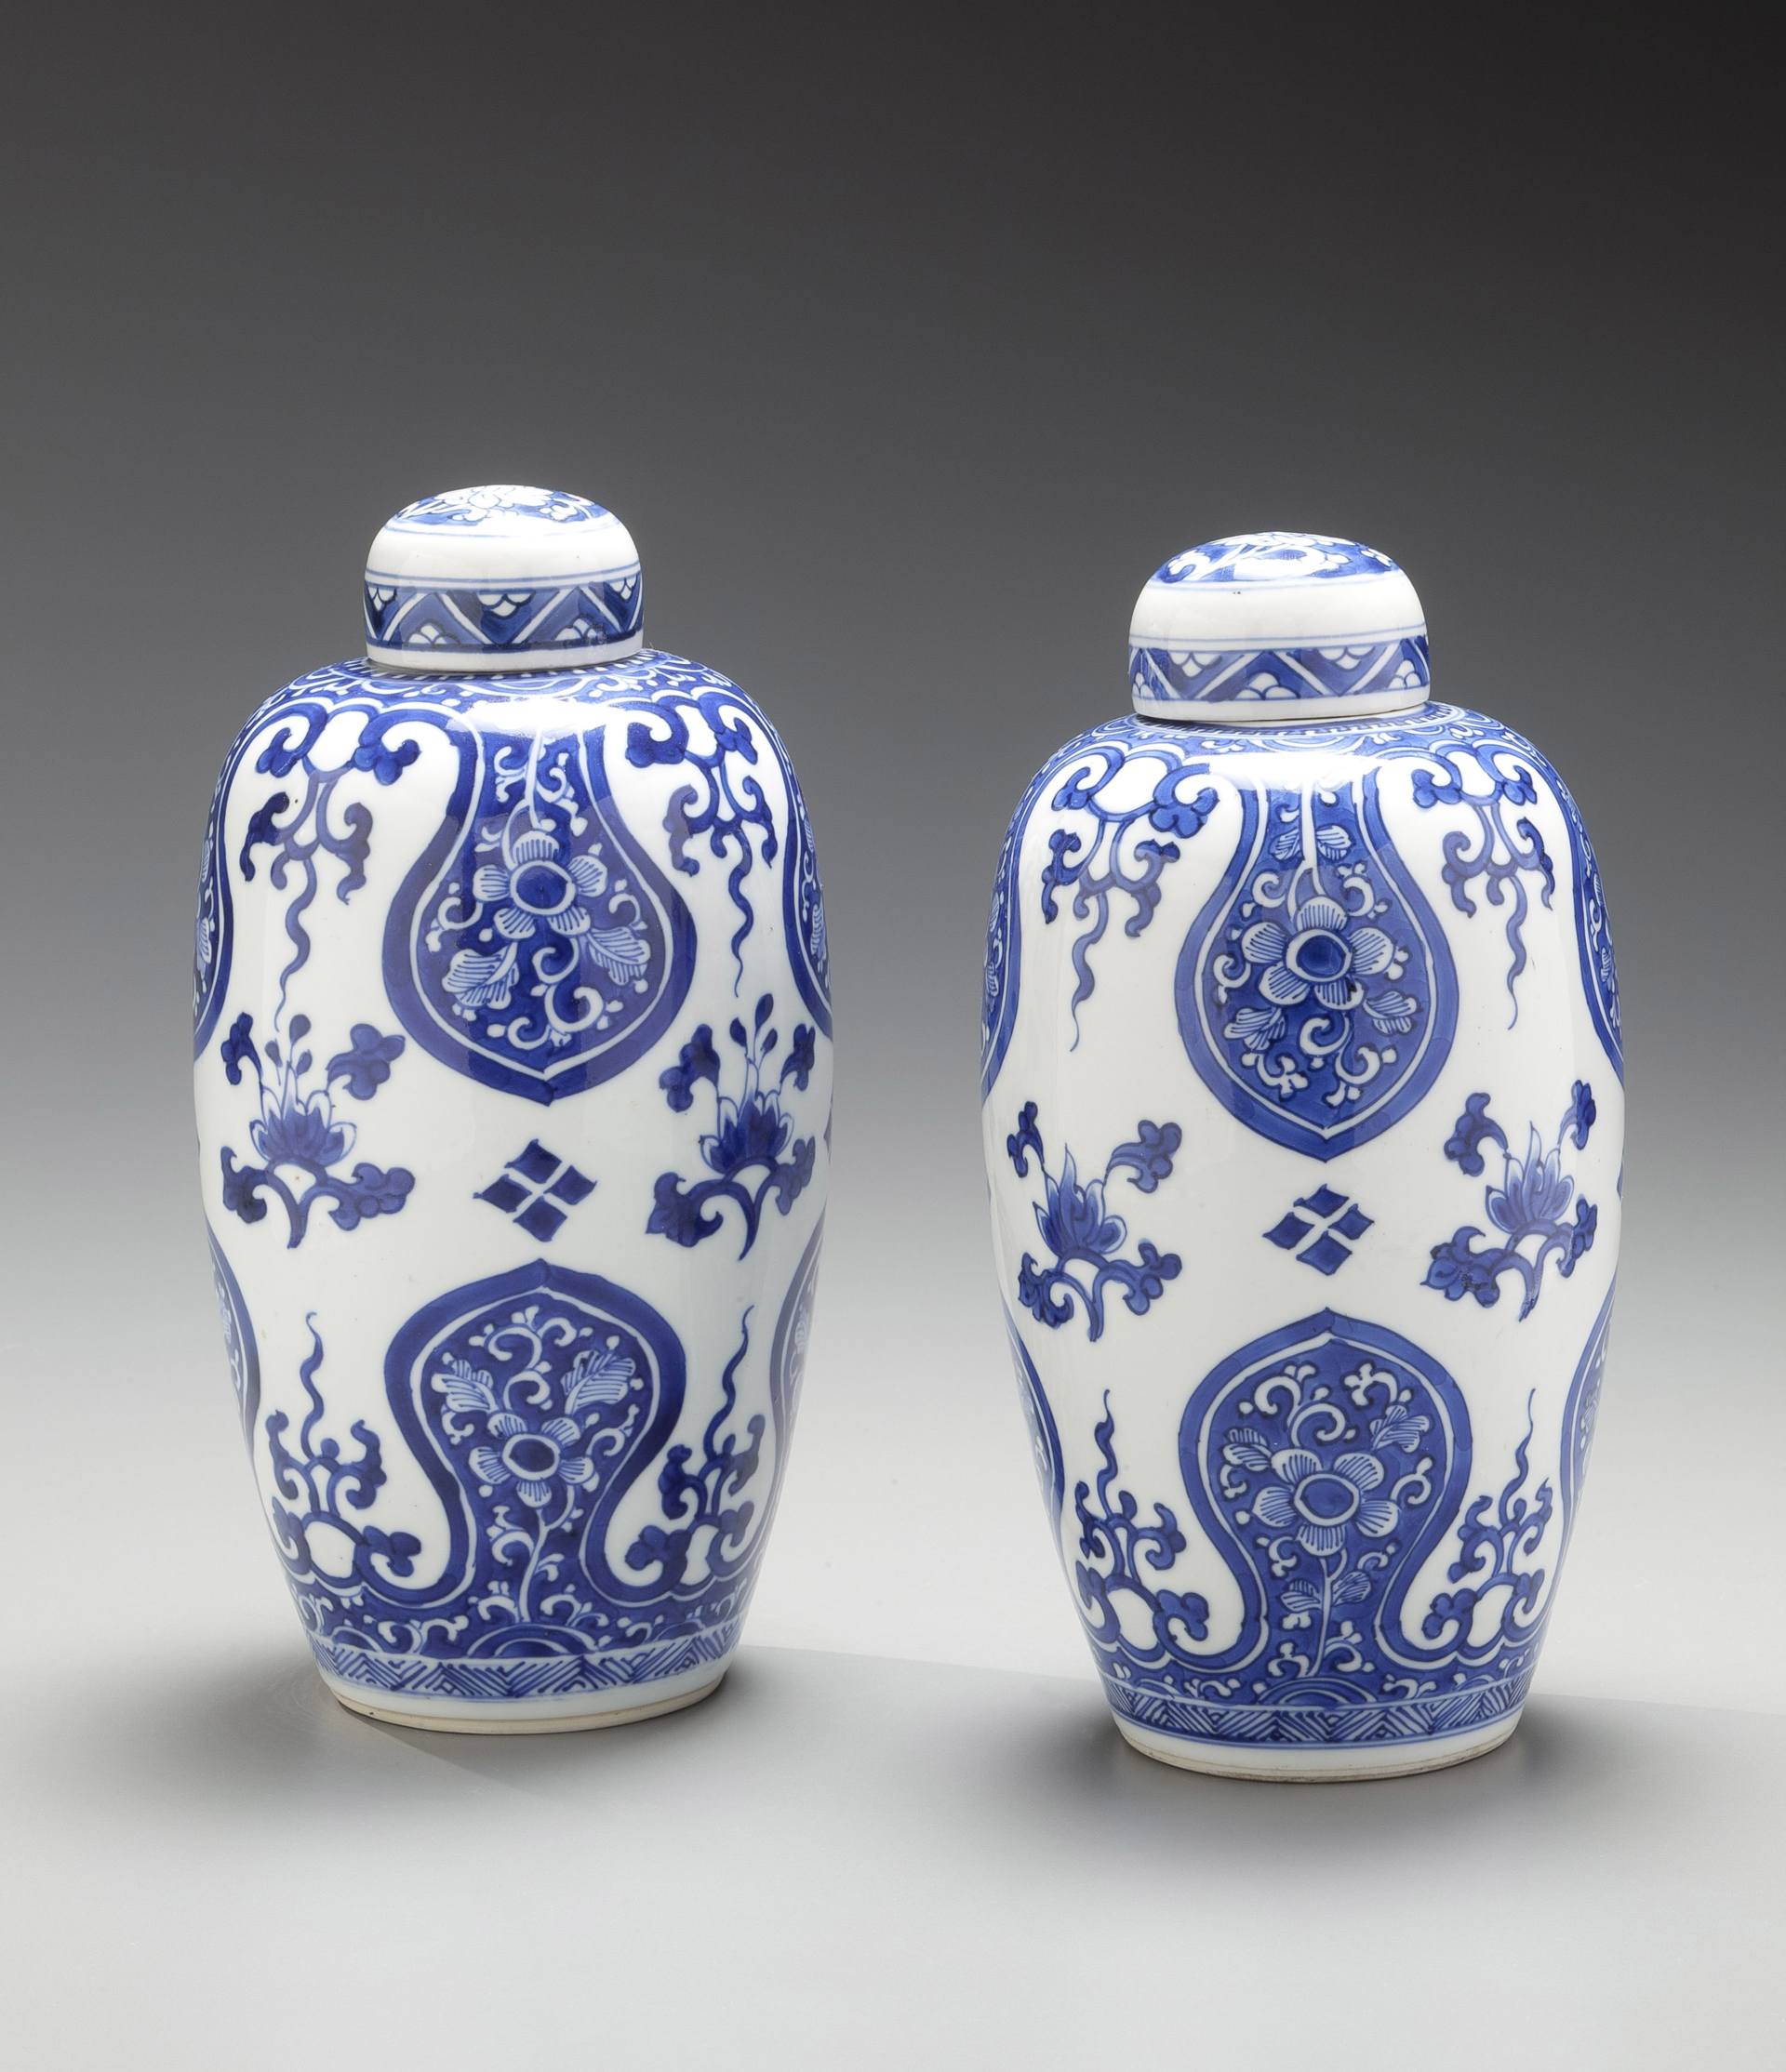 PAIR OF BLUE AND WHITE OVOID JARS AND COVERS